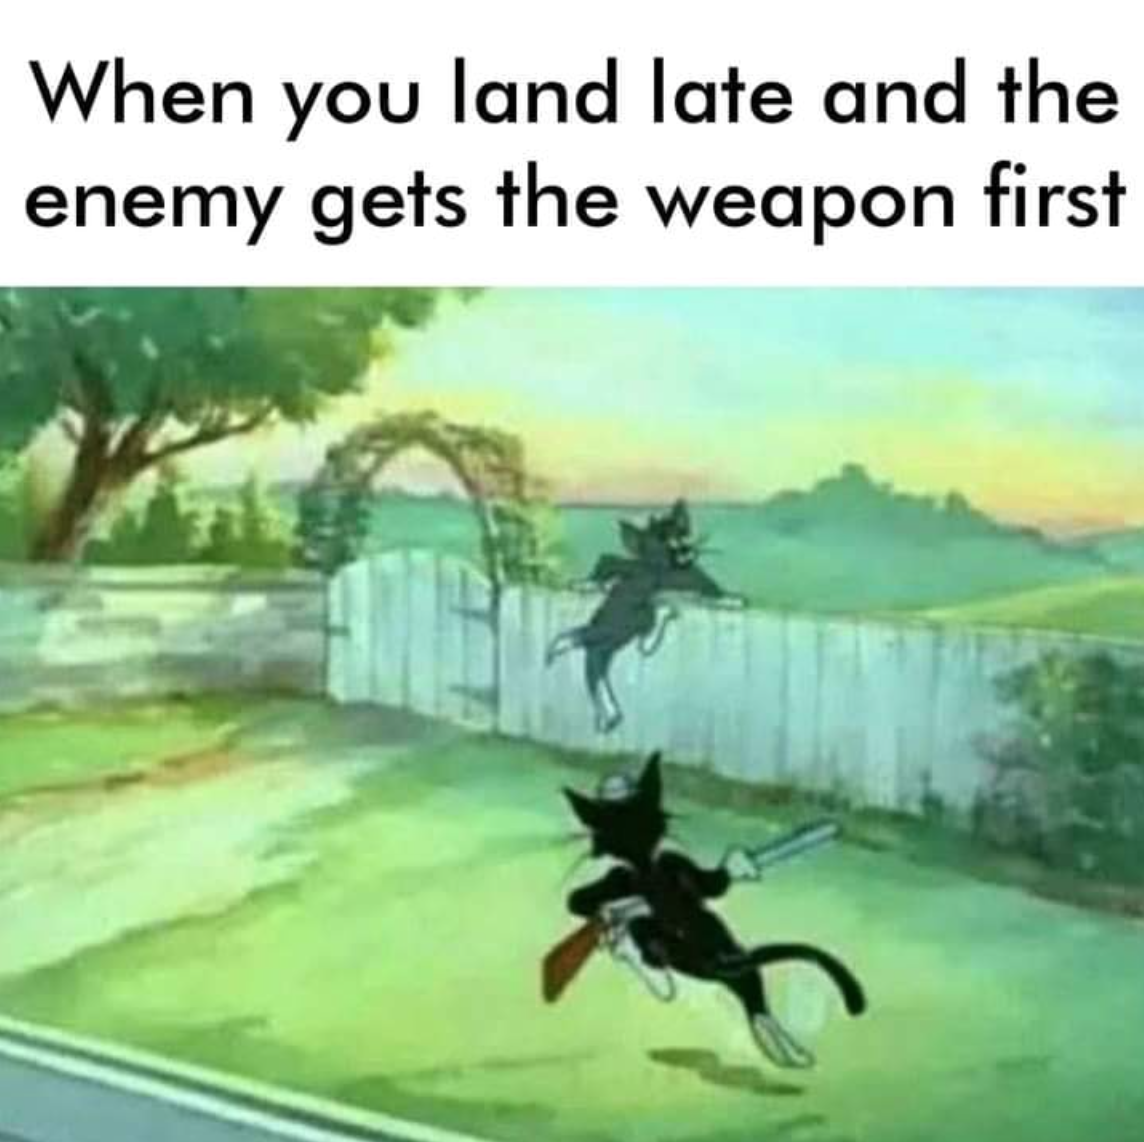 you land late and the enemy gets - When you land late and the enemy gets the weapon first